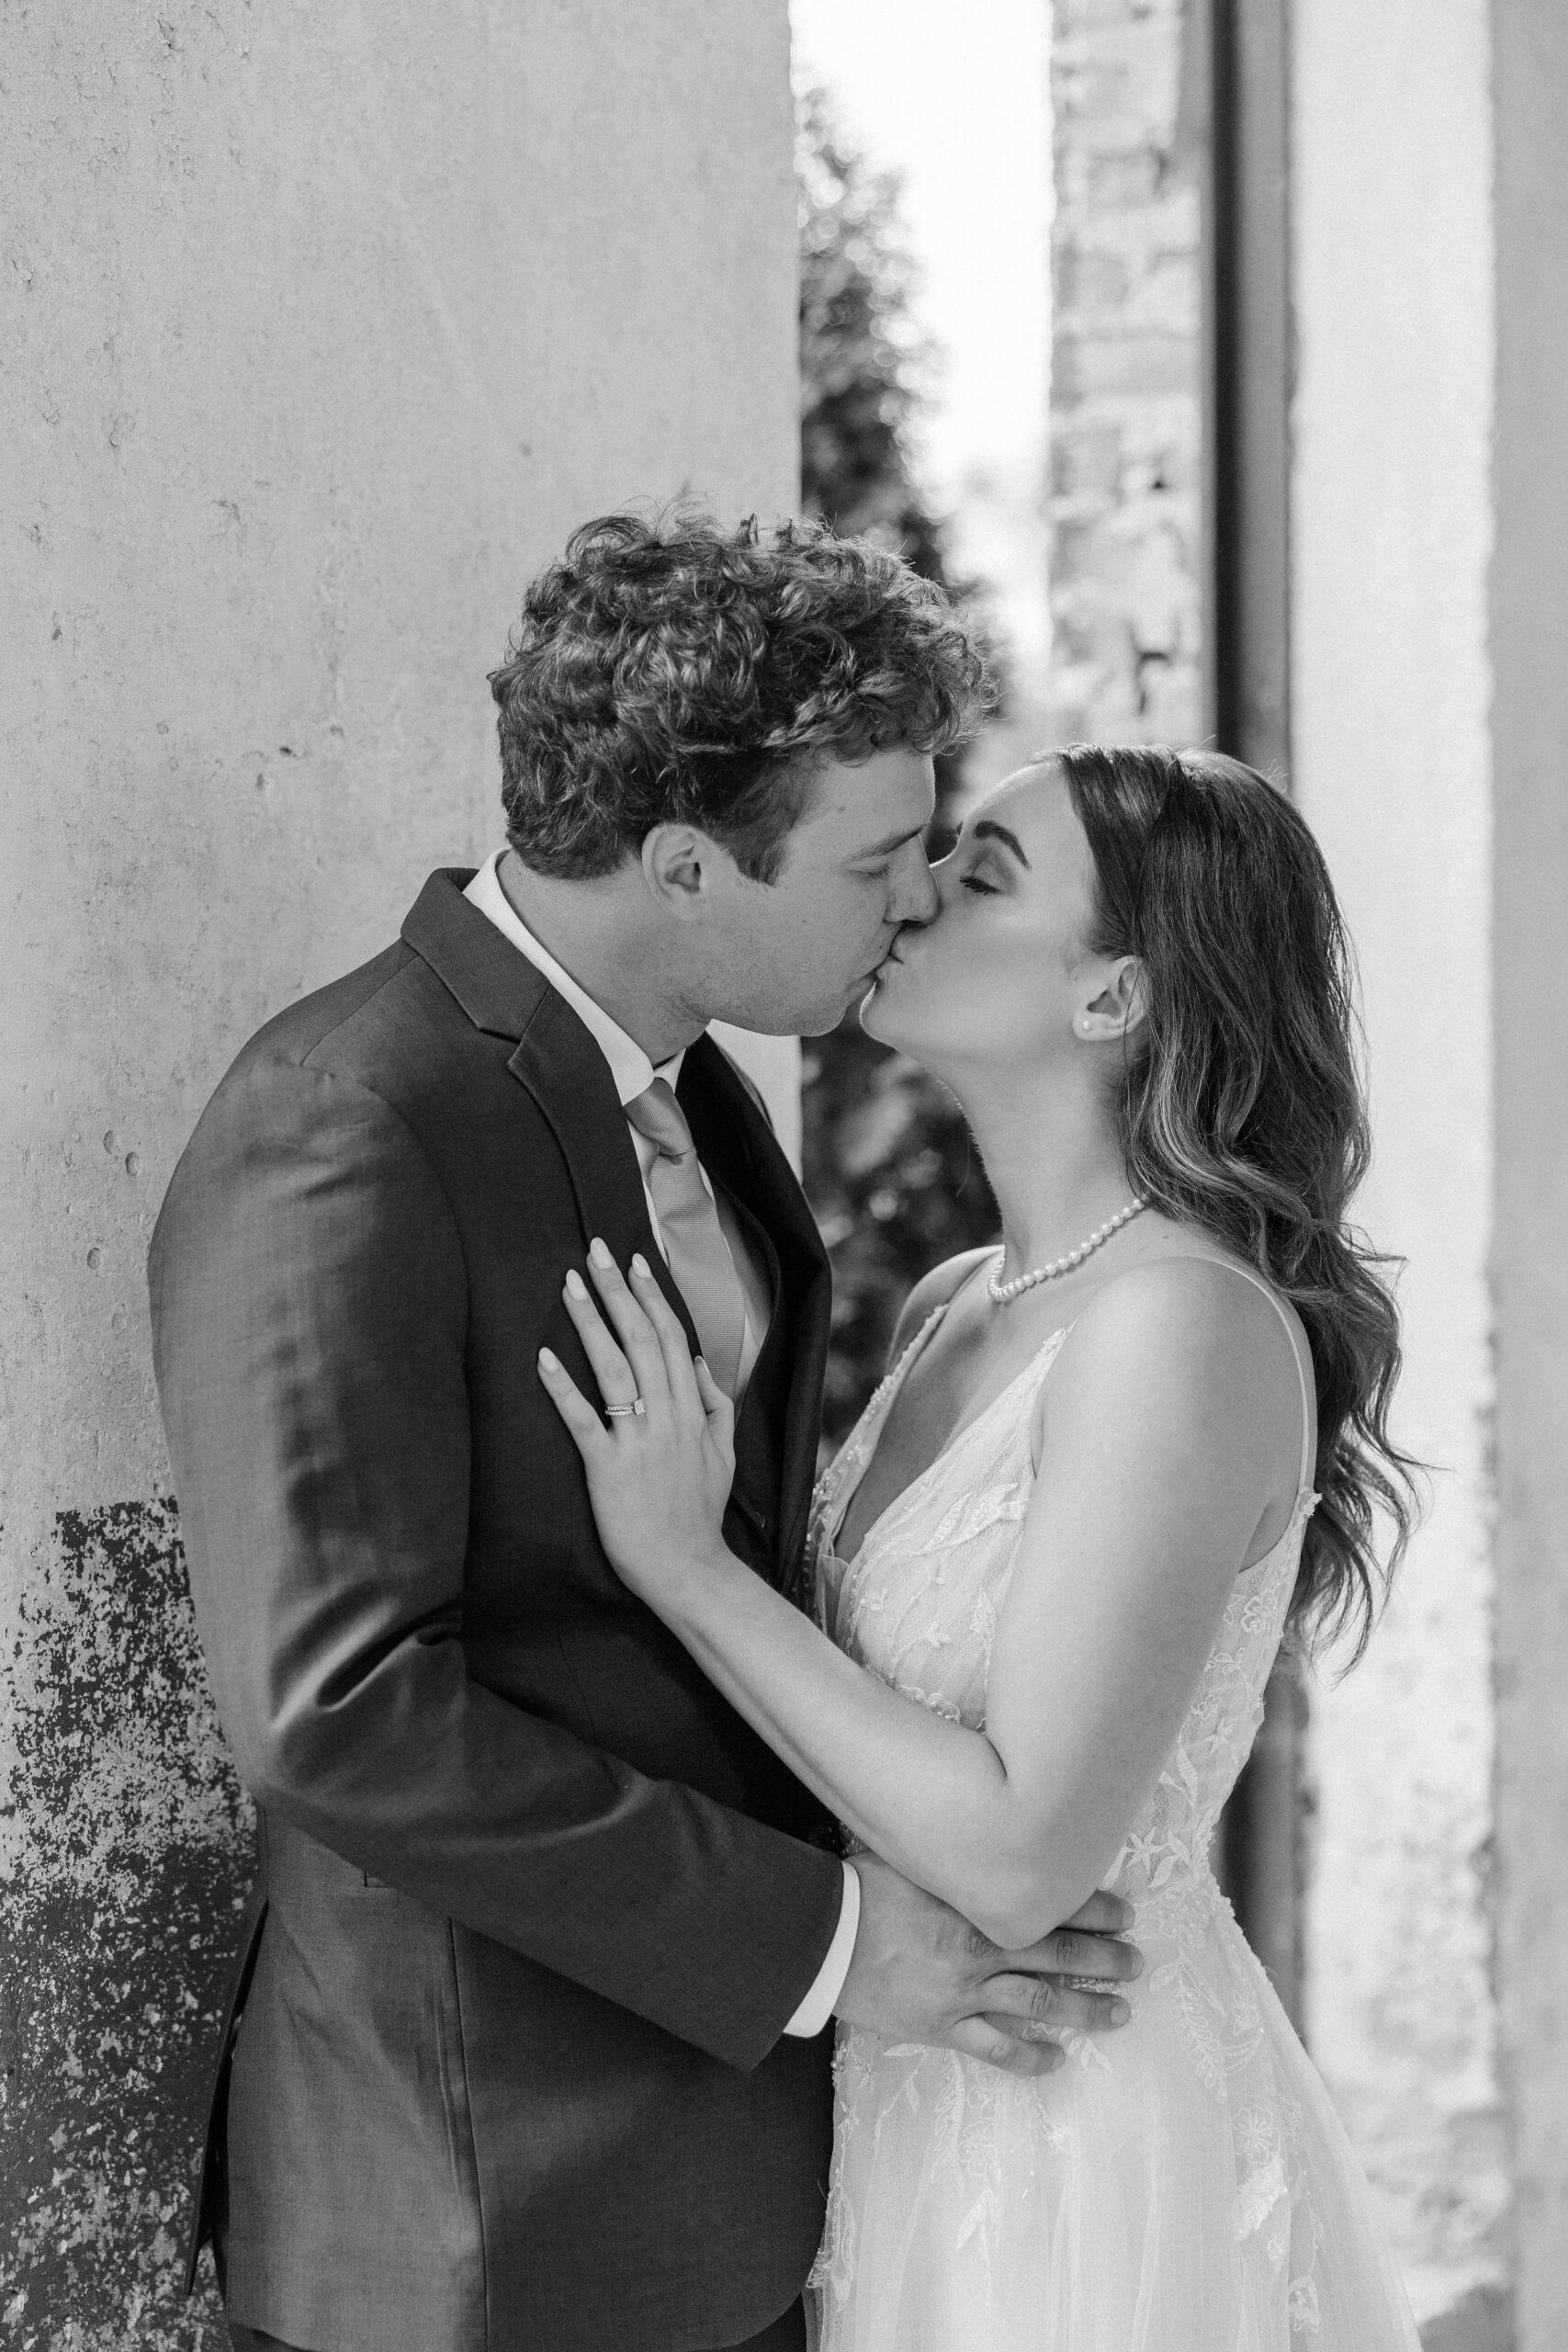 Newlyweds lean on a rustic wall while kissing